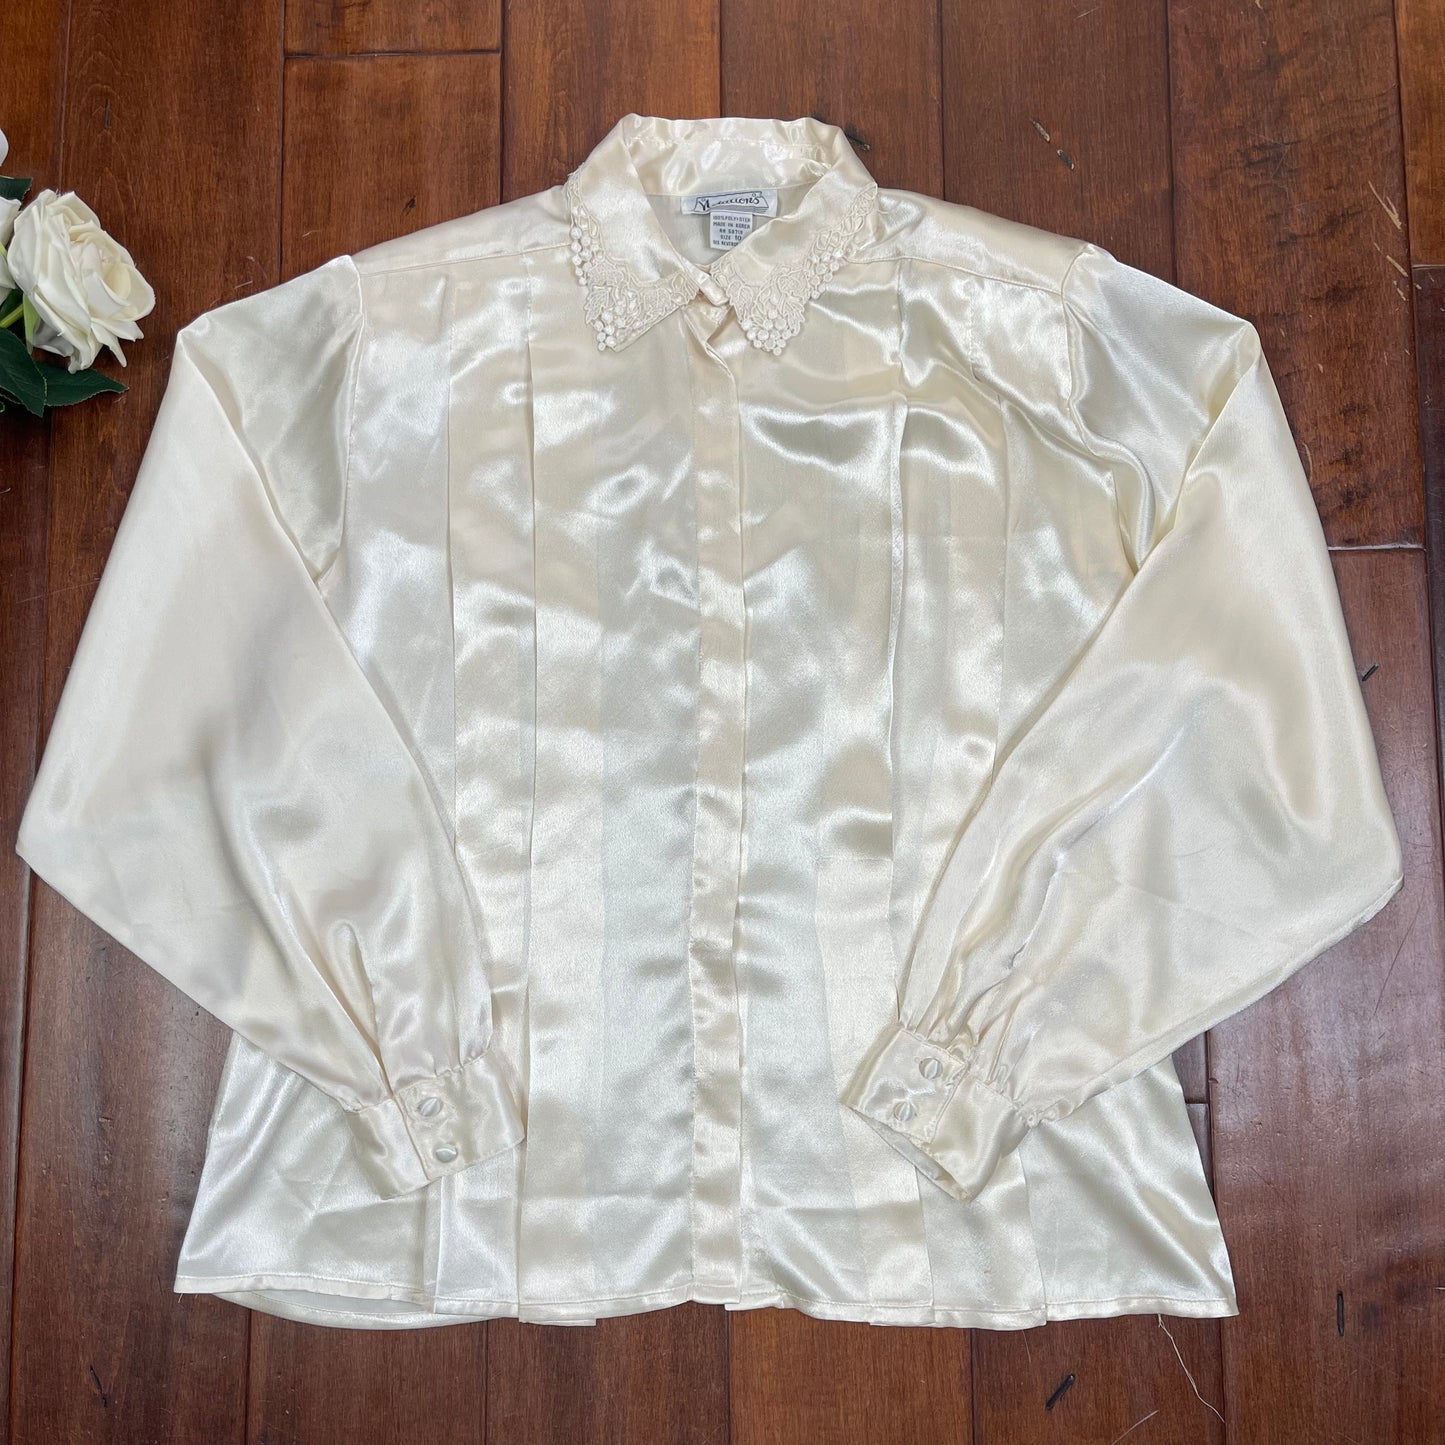 VINTAGE VICTORIAN STYLE BUTTON-UP